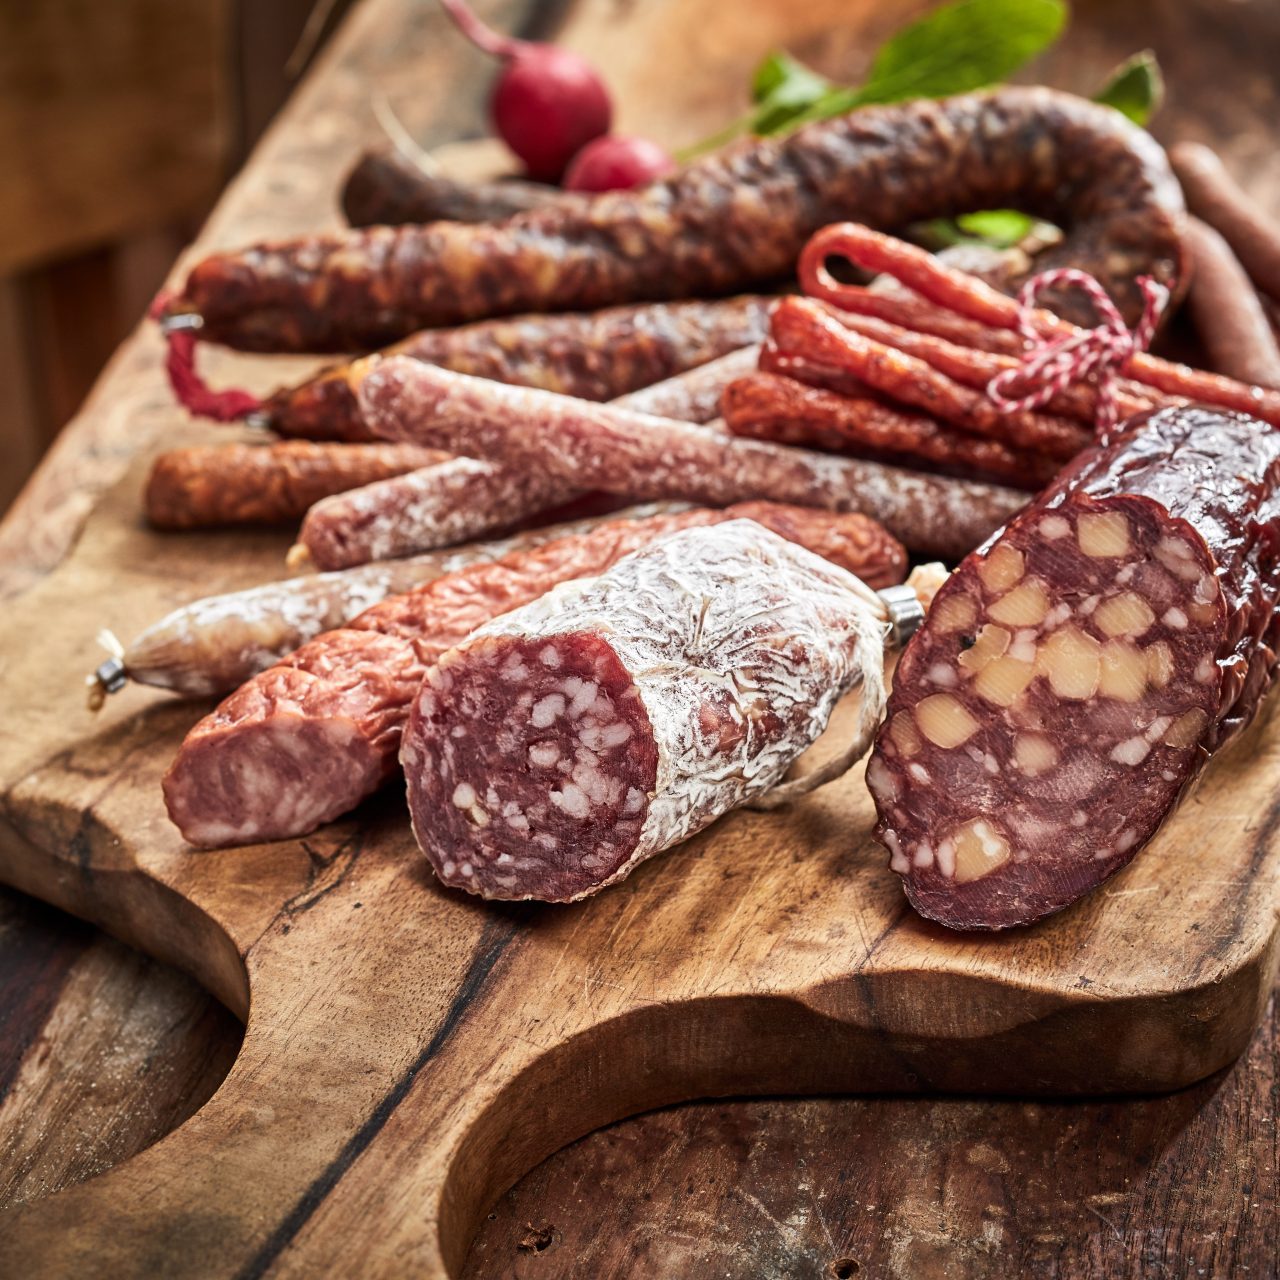 meat and sausages lying on a wooden board